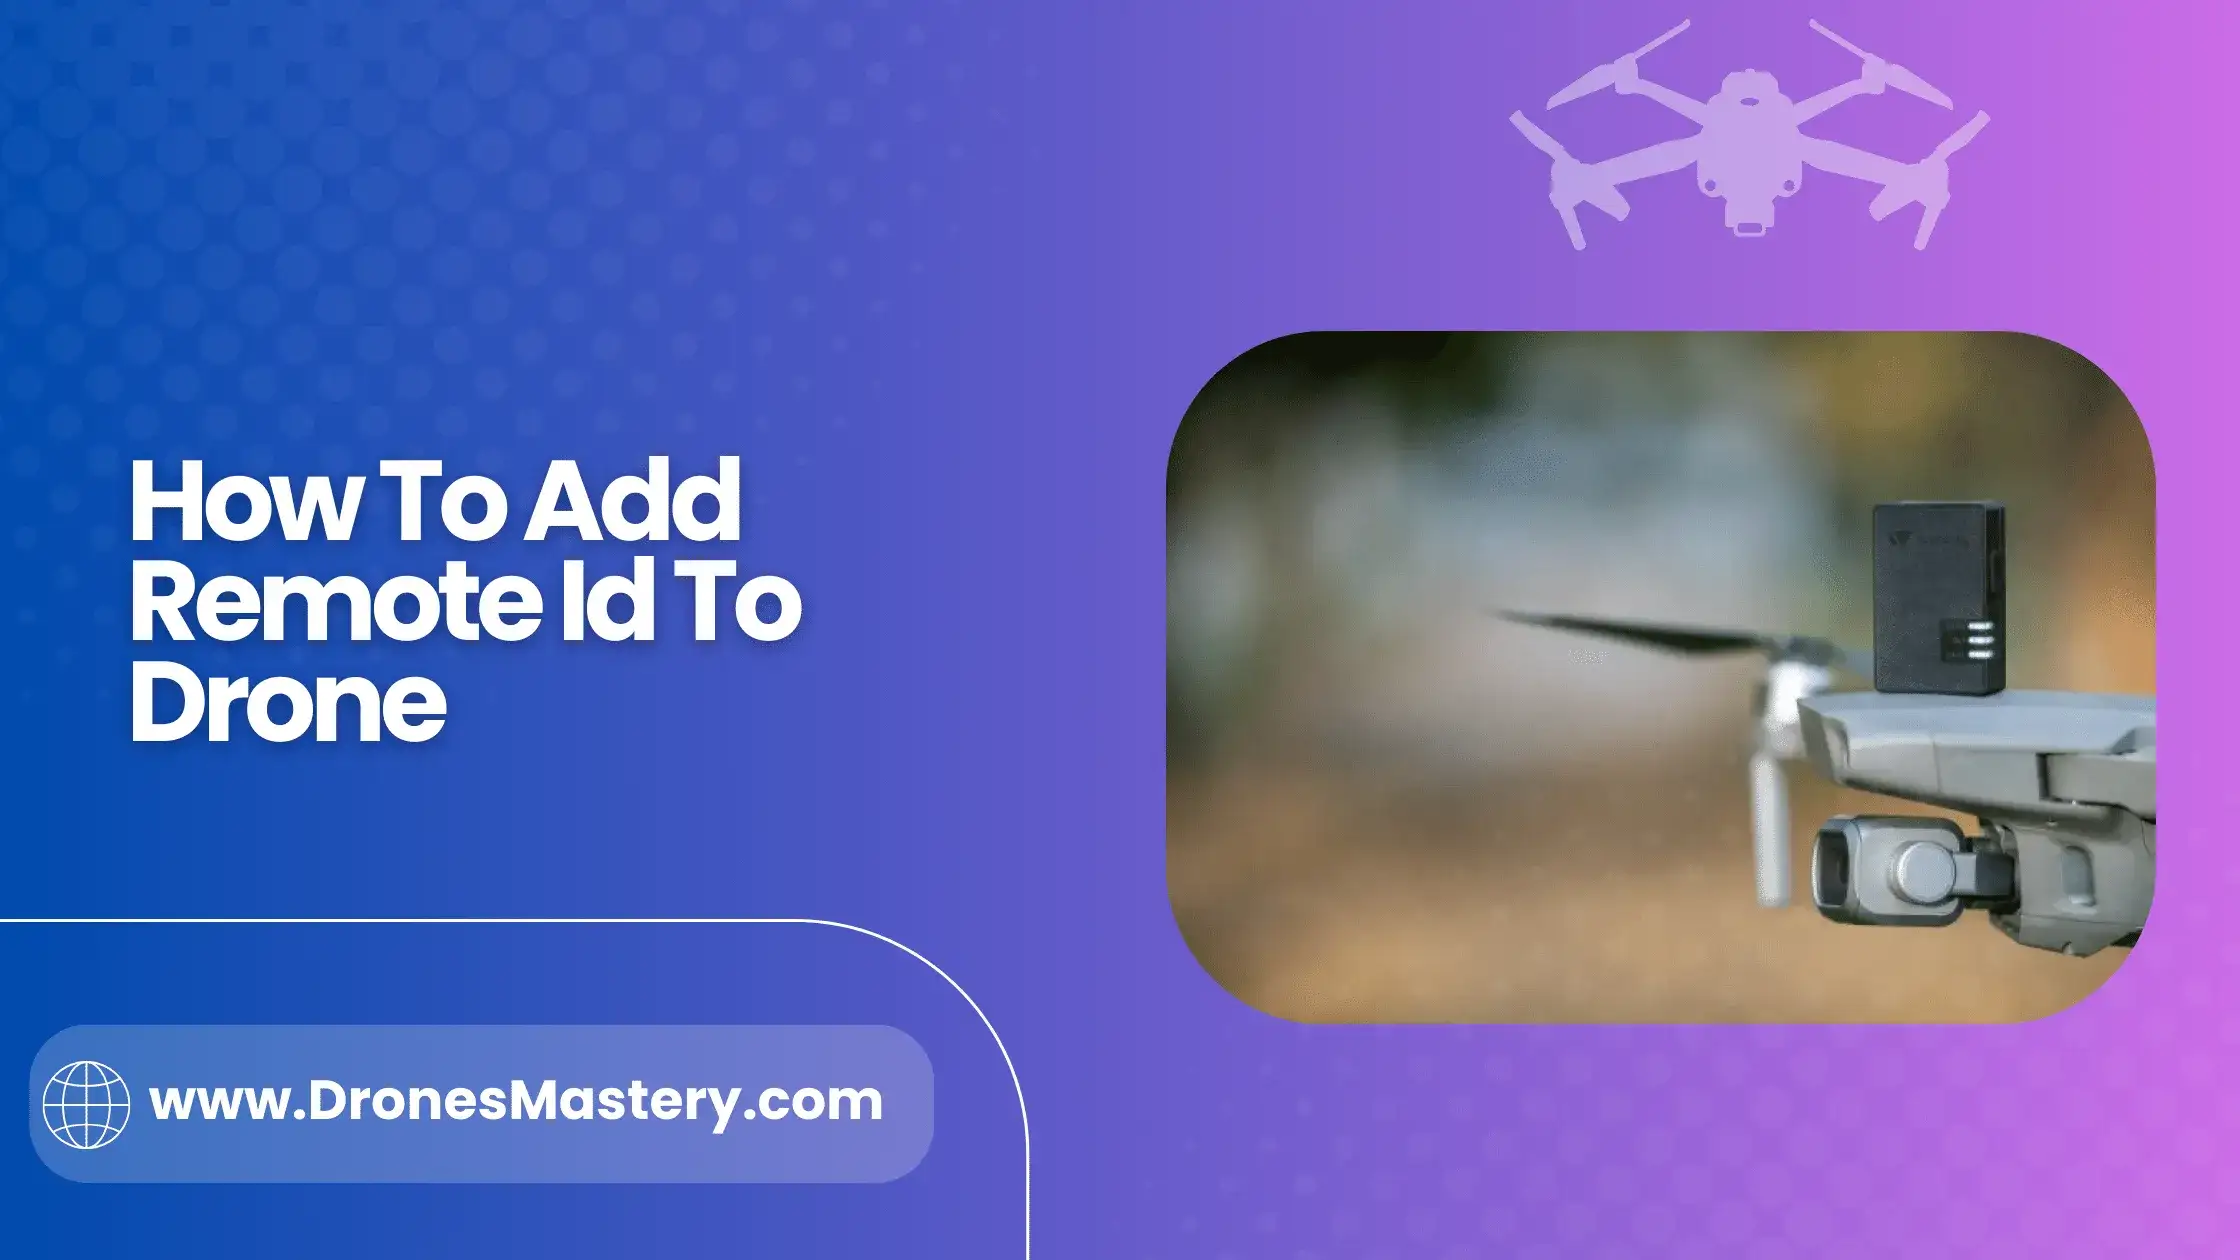 How To Add Remote ID To Drone? (A Step-by-Step Guide)